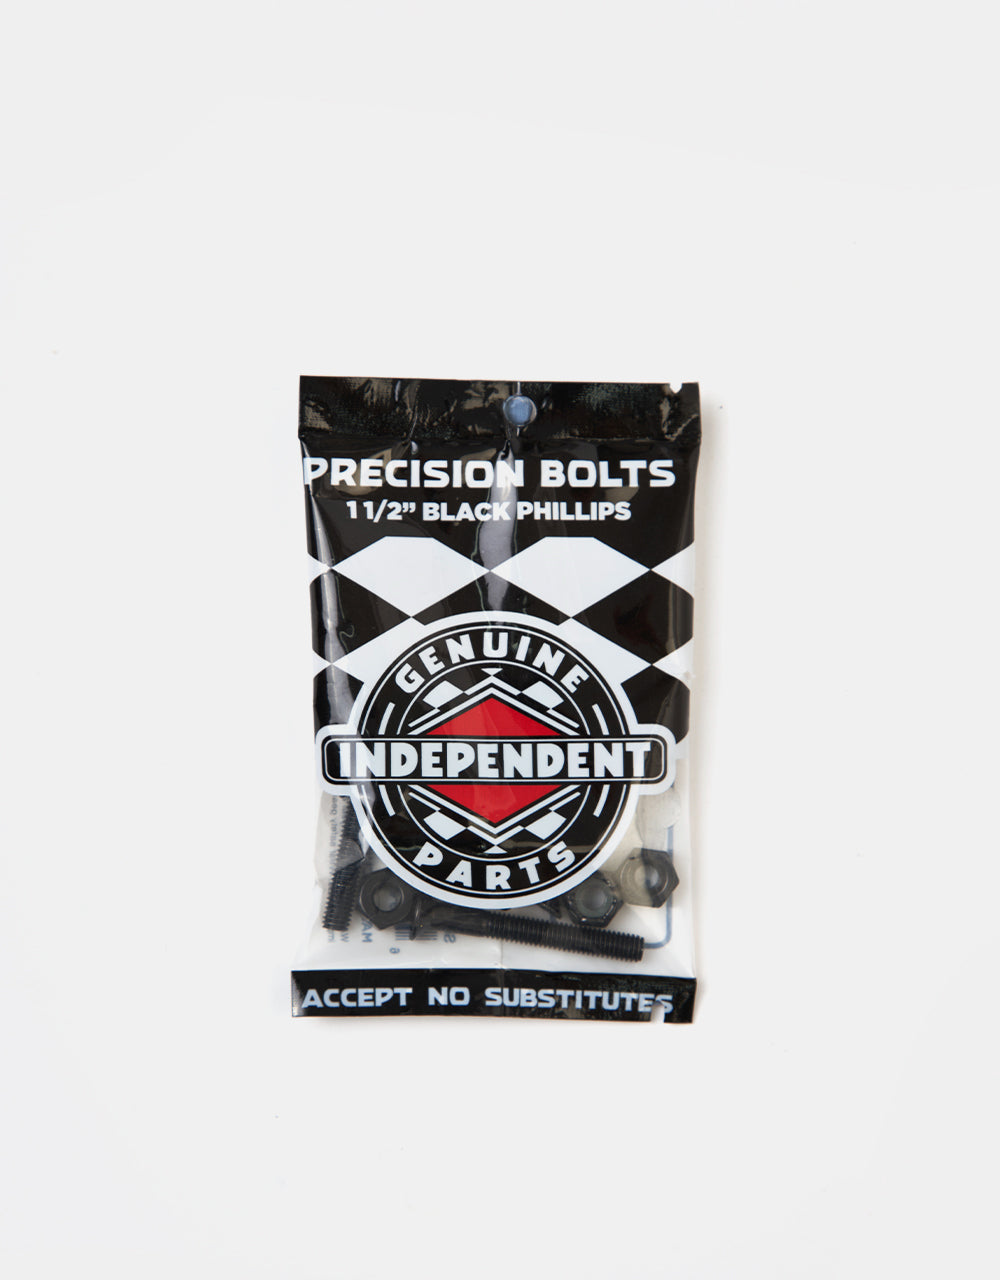 Independent 1 1/2" Phillips Bolts